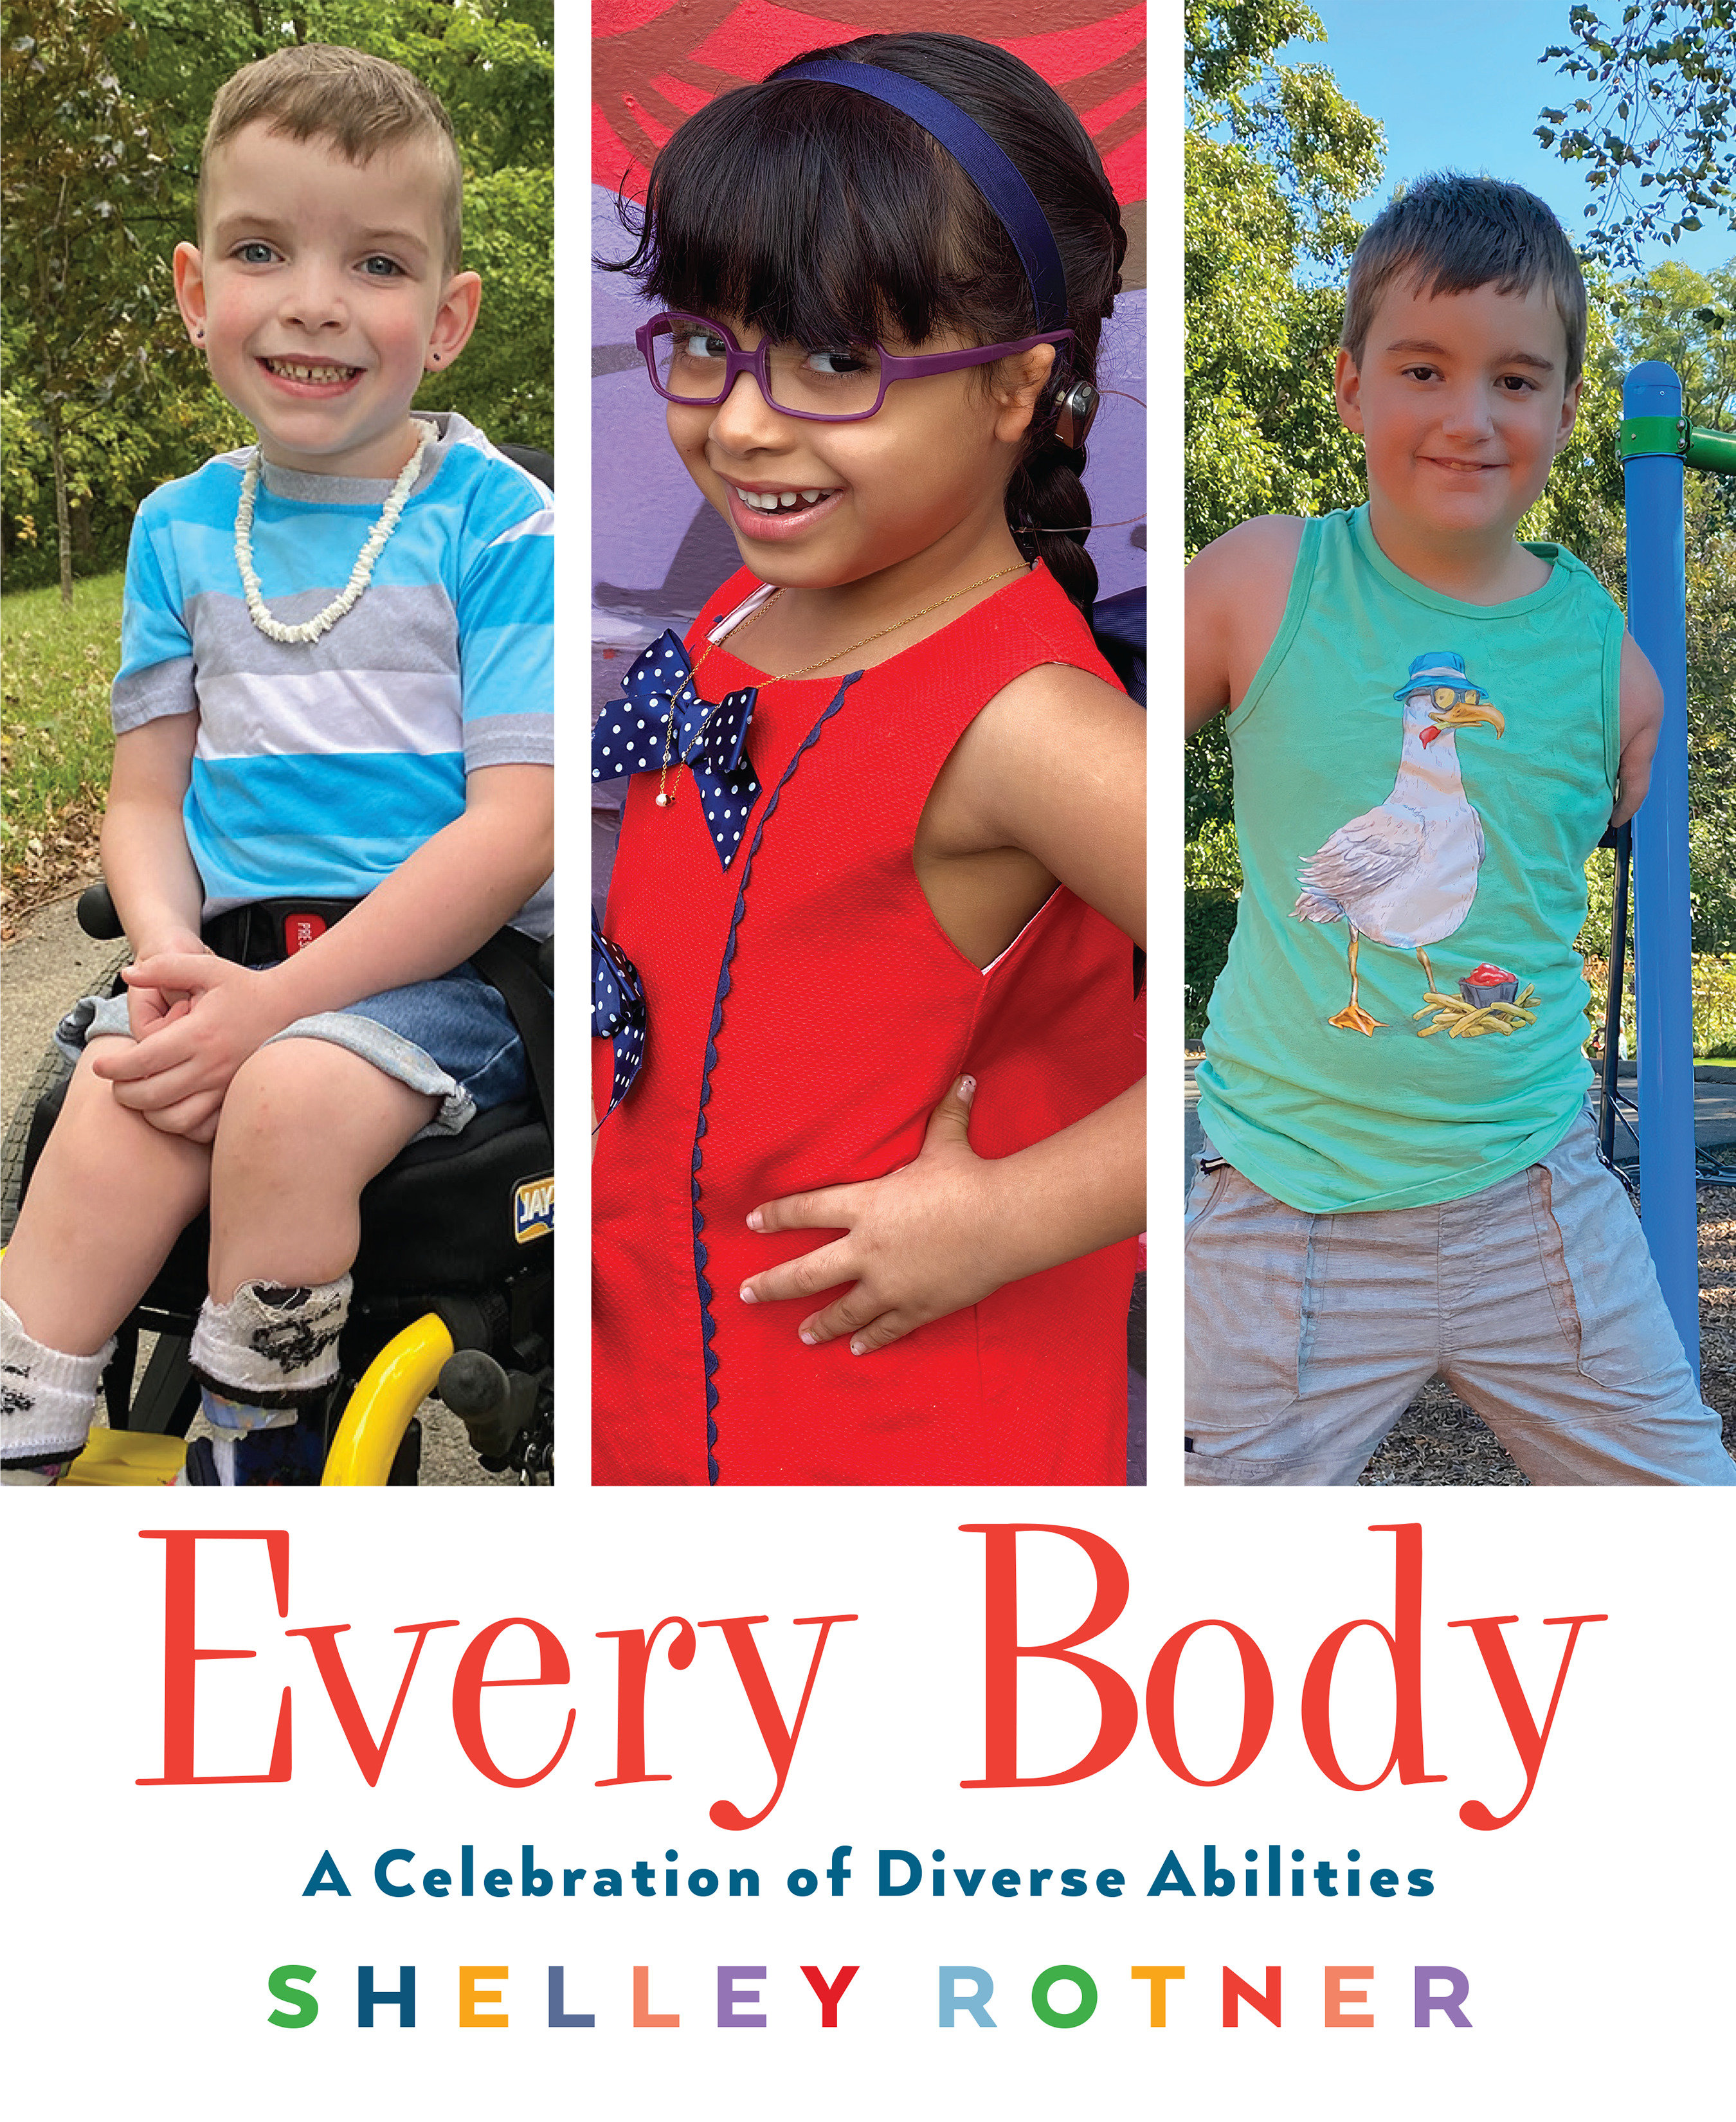 Every Body (Hardcover Book)